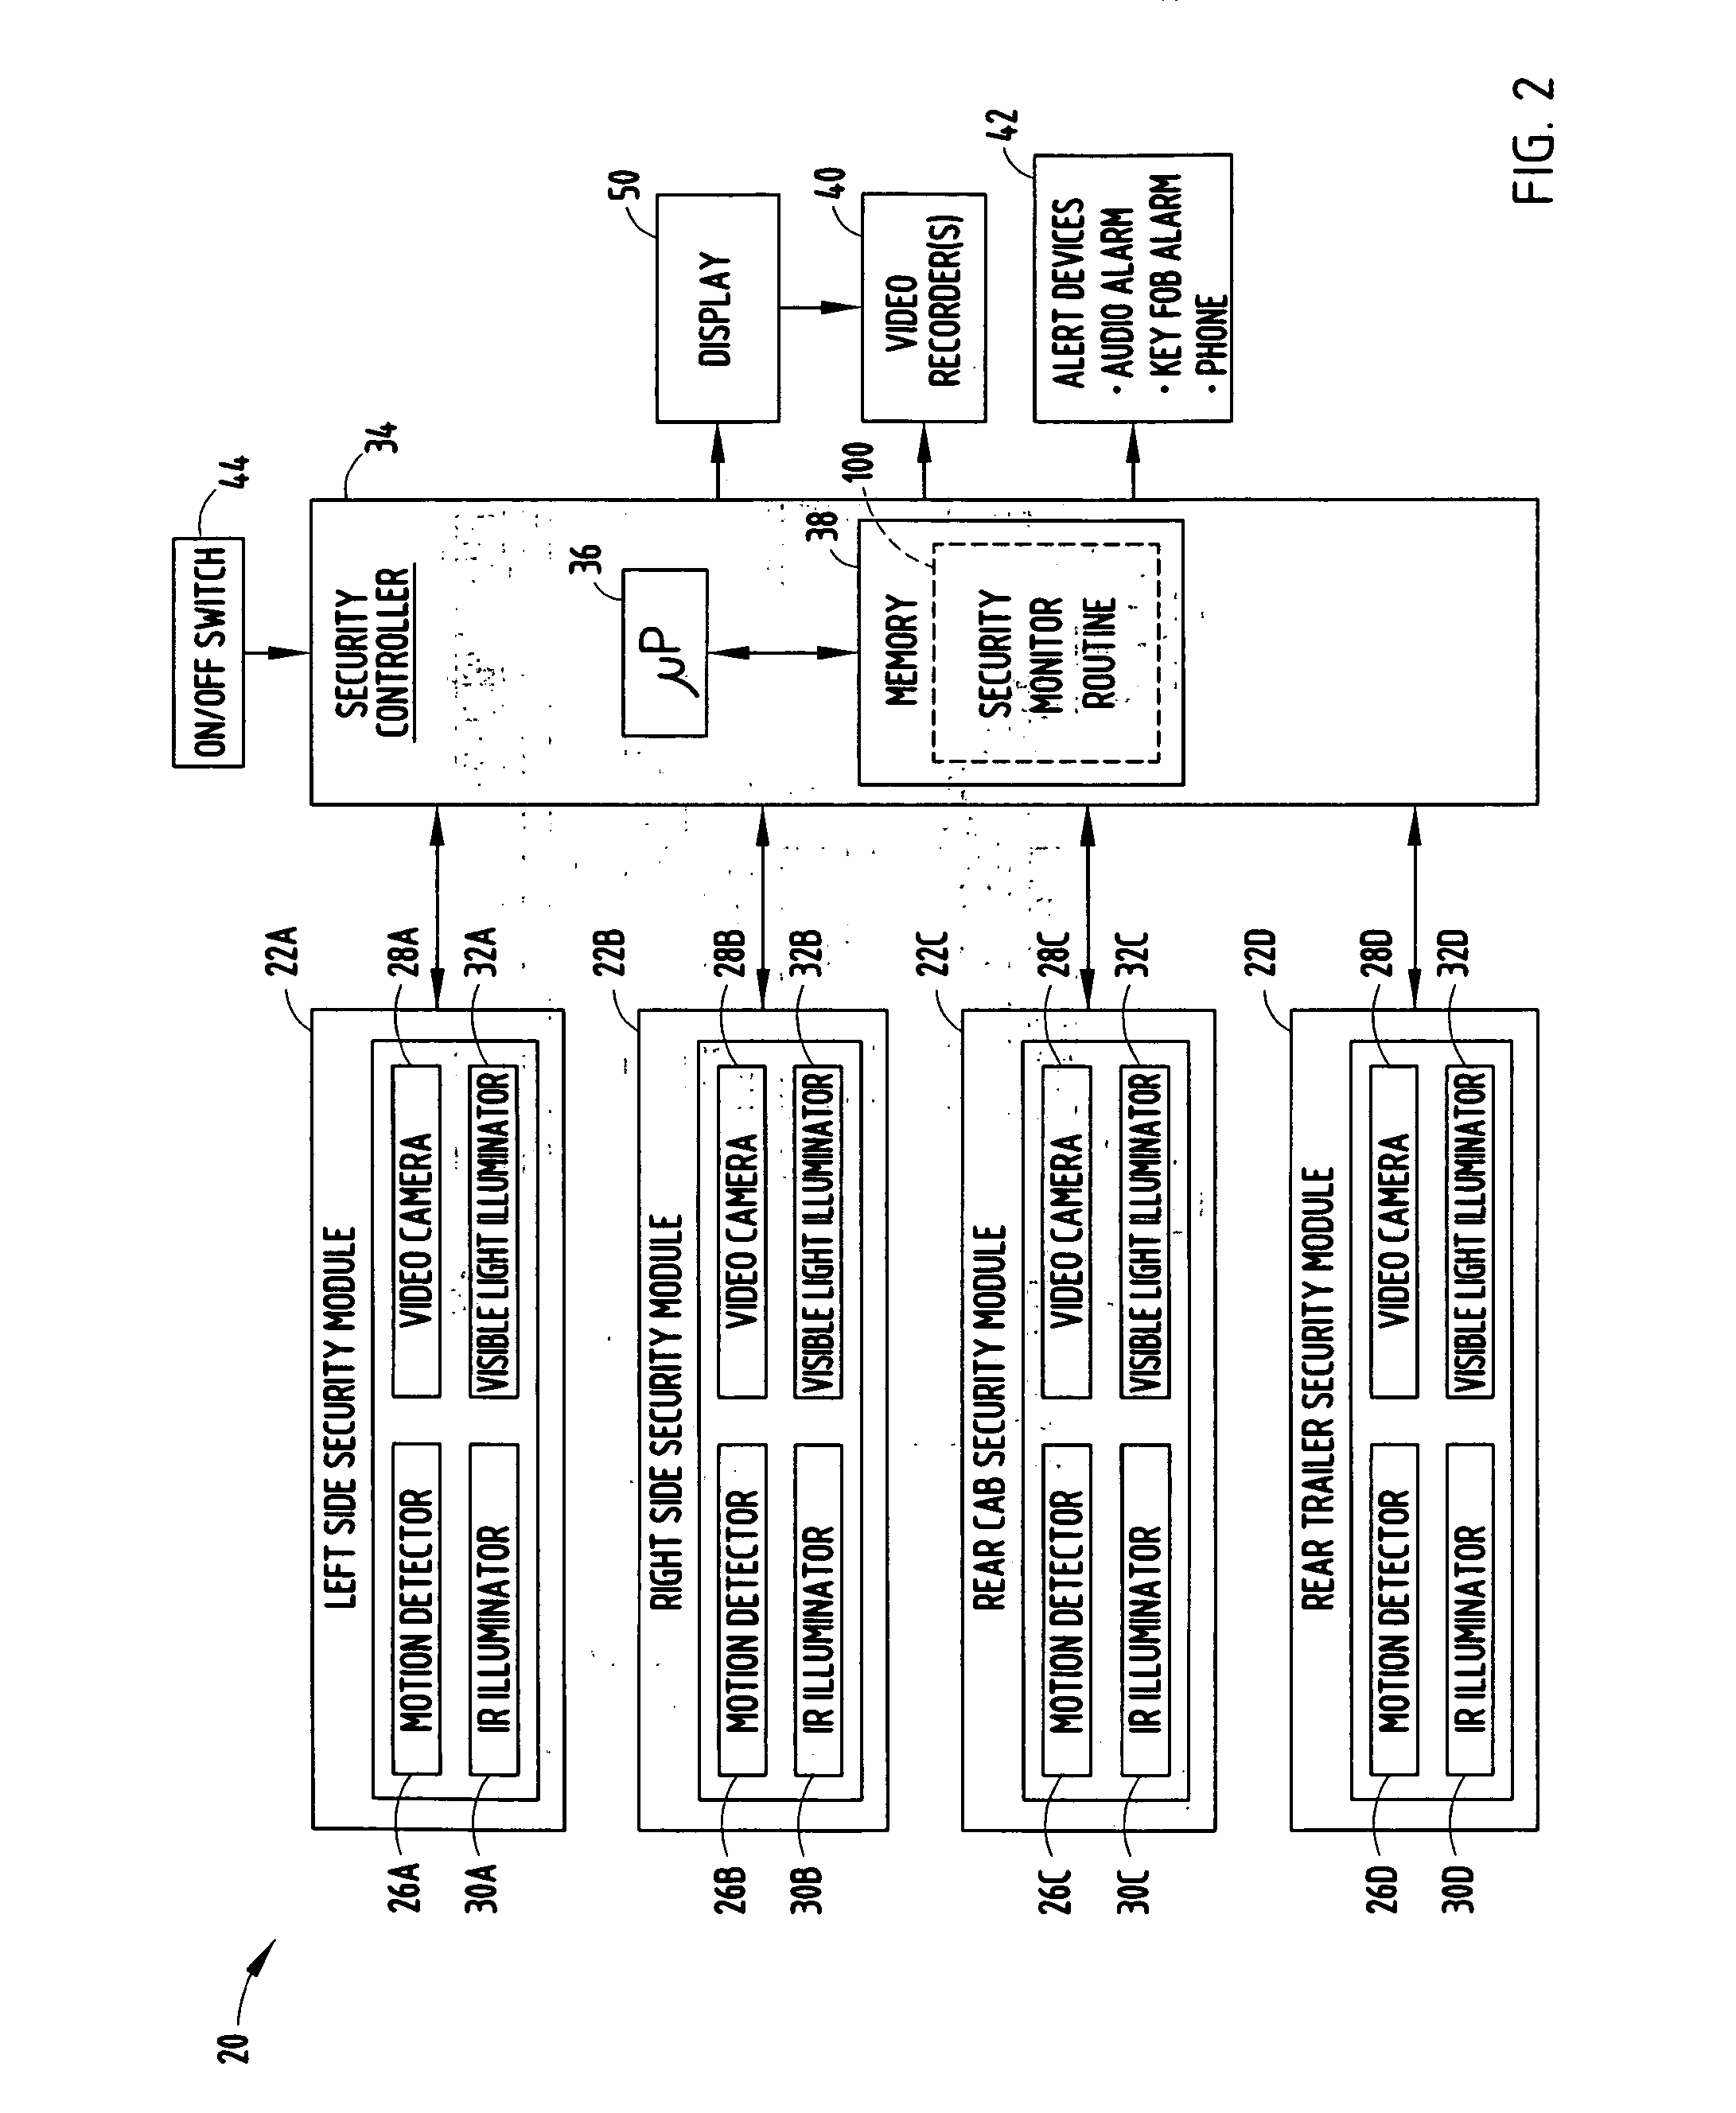 Vehicle security monitor system and method